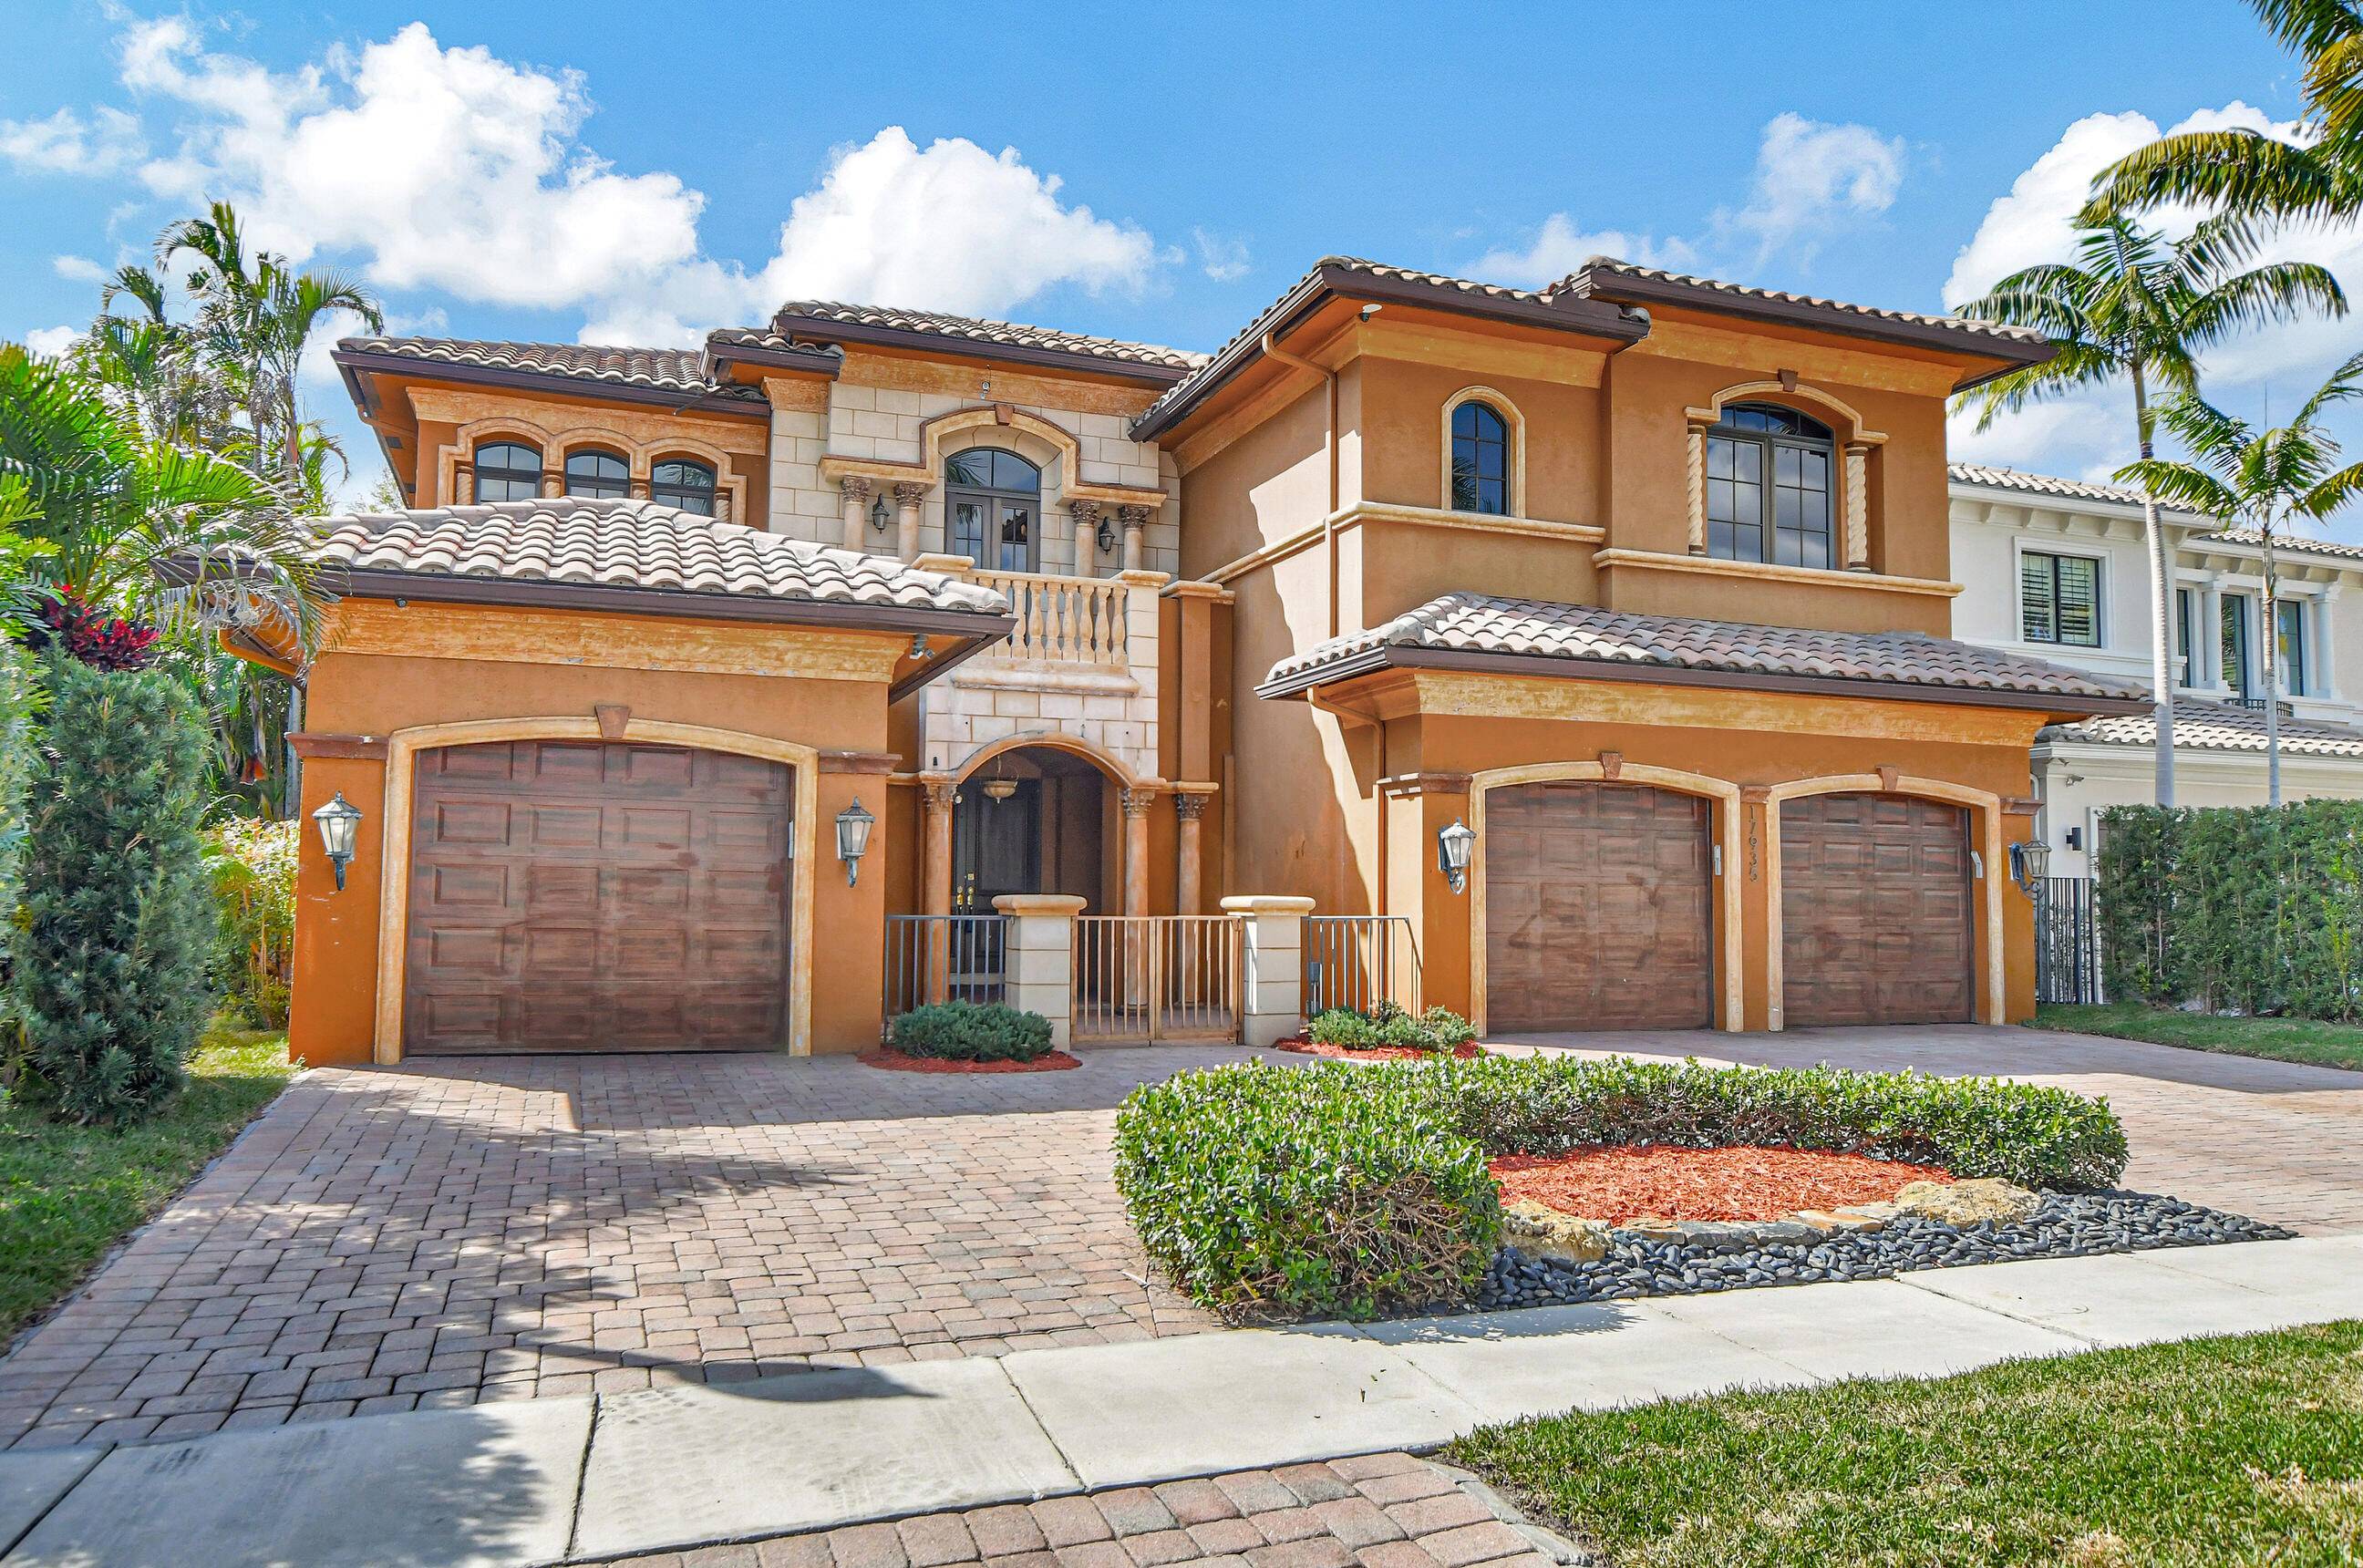 Nestled within the prestigious enclave of The Oaks at Boca Raton, this Mediterranean style home has potential to exude its original Sophistication and Grandeur.